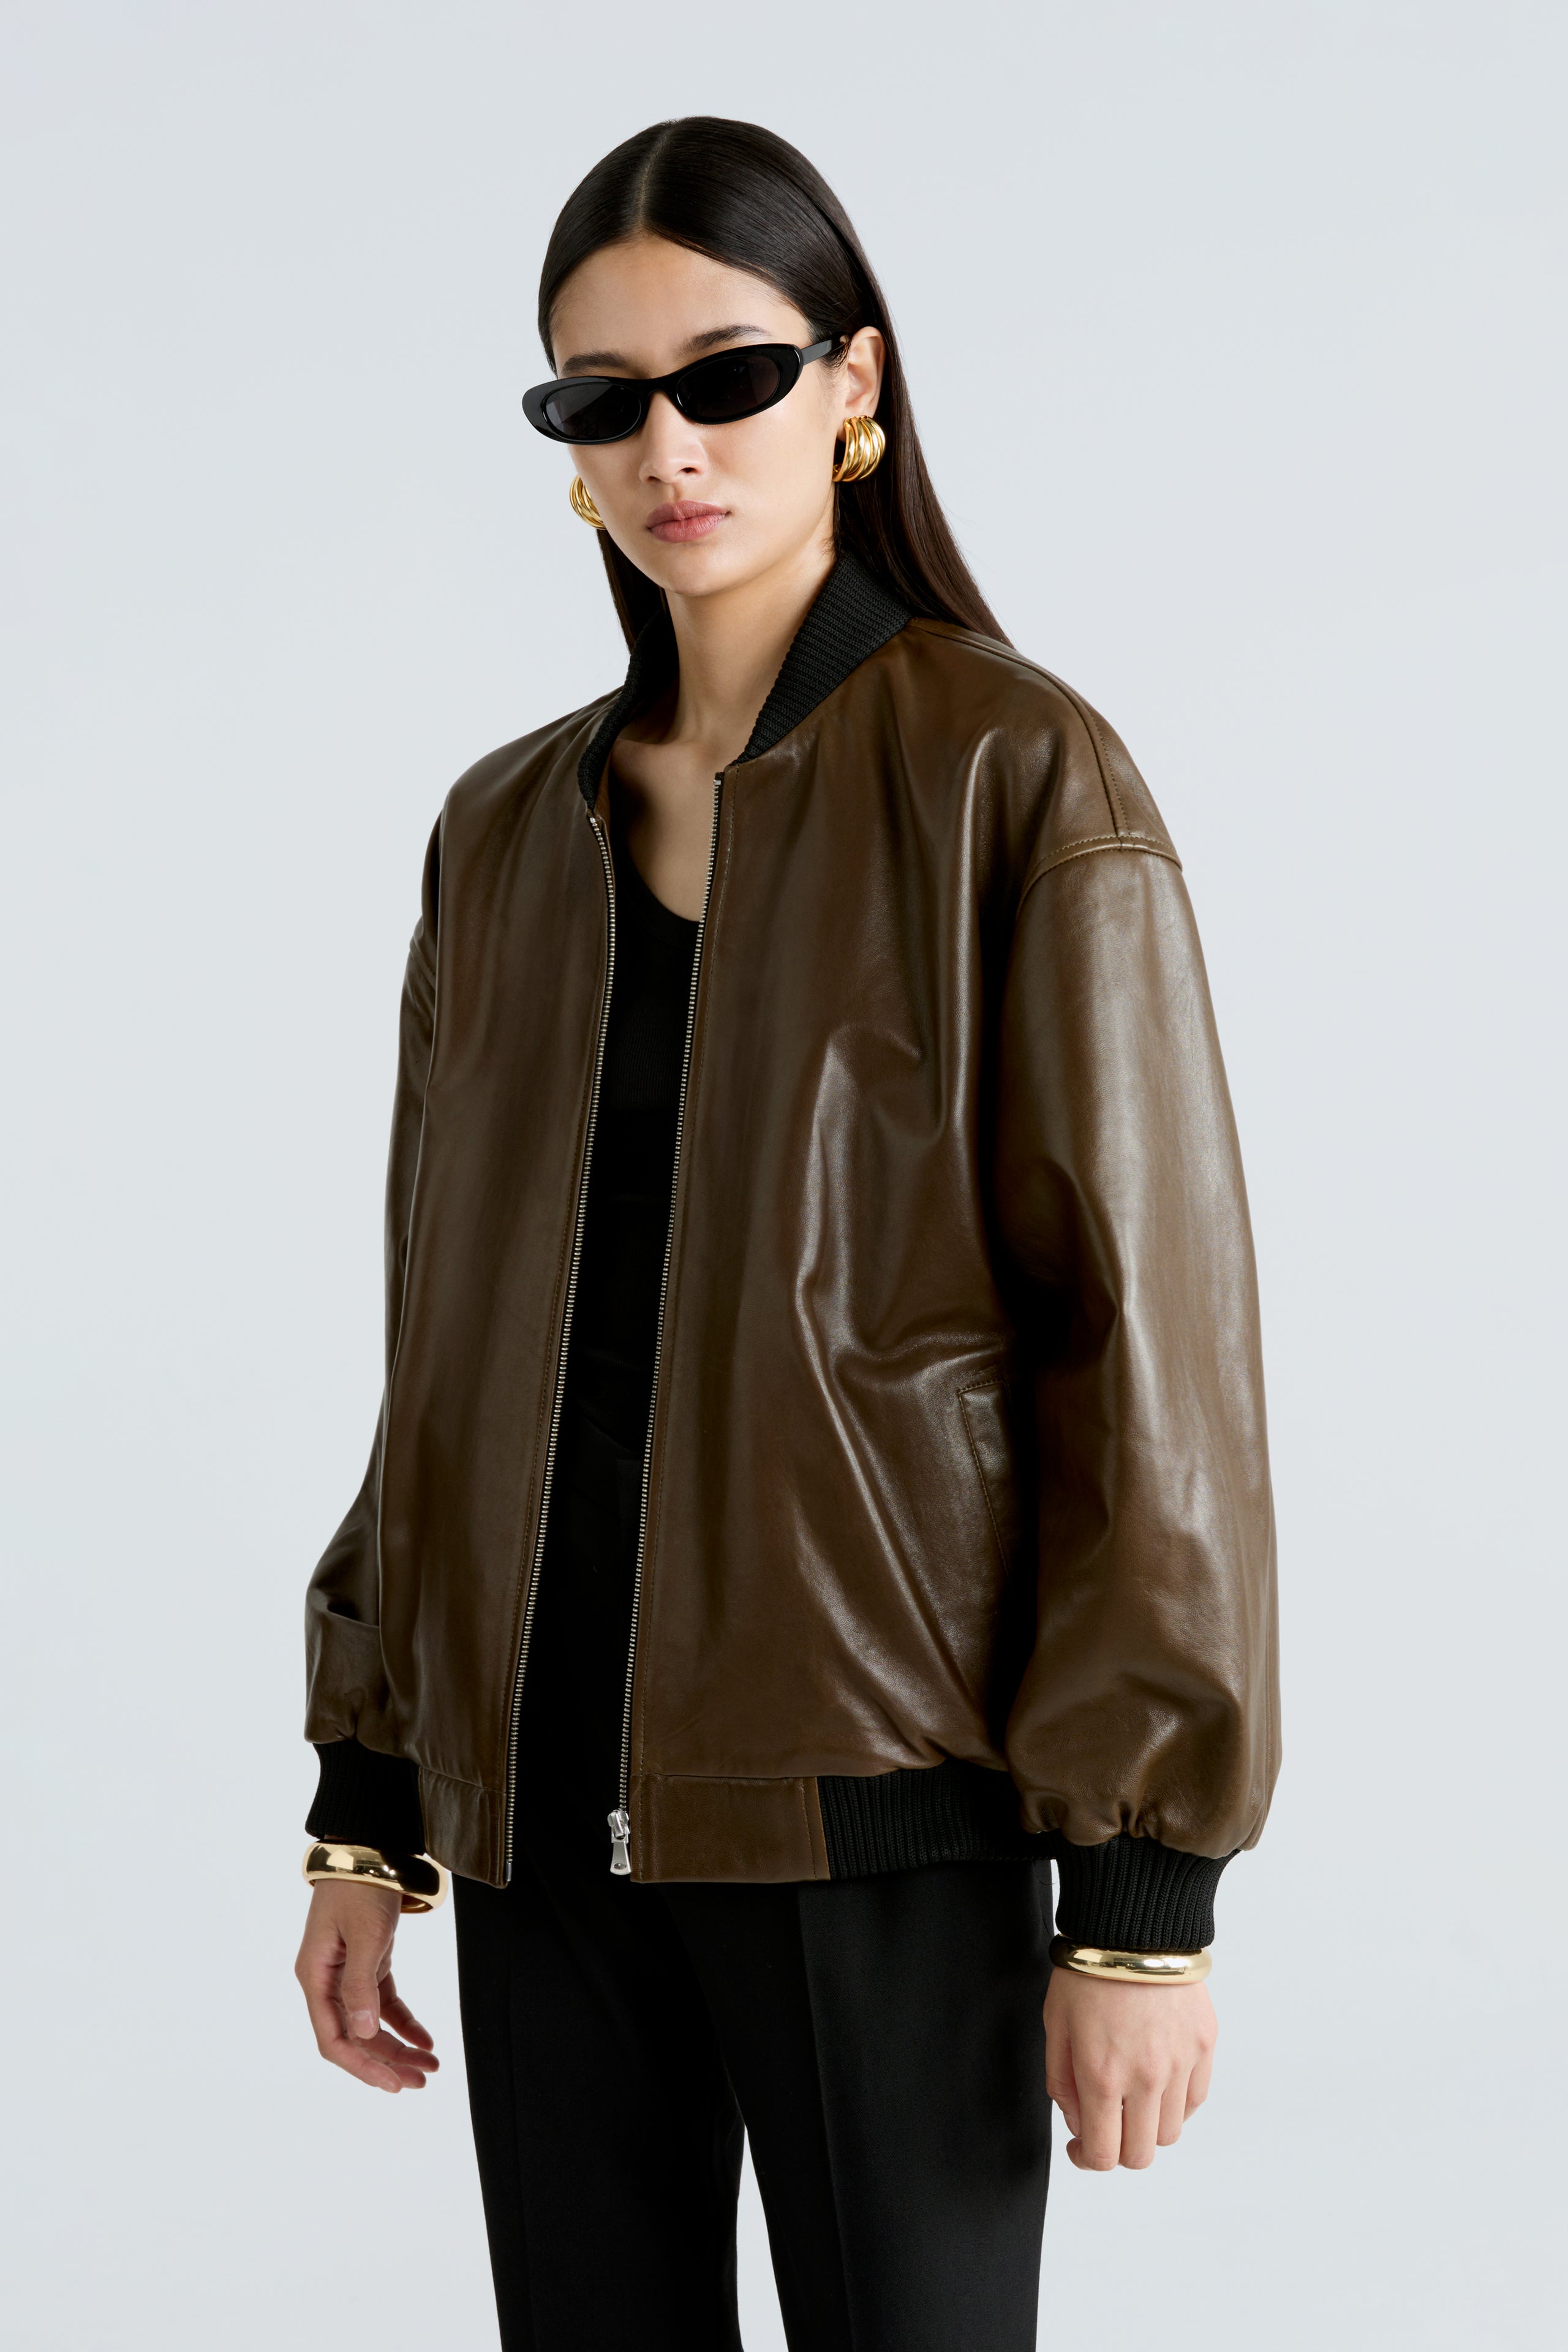 Model is wearing the Marly Nicoise Leather Bomber Jacket Close Up